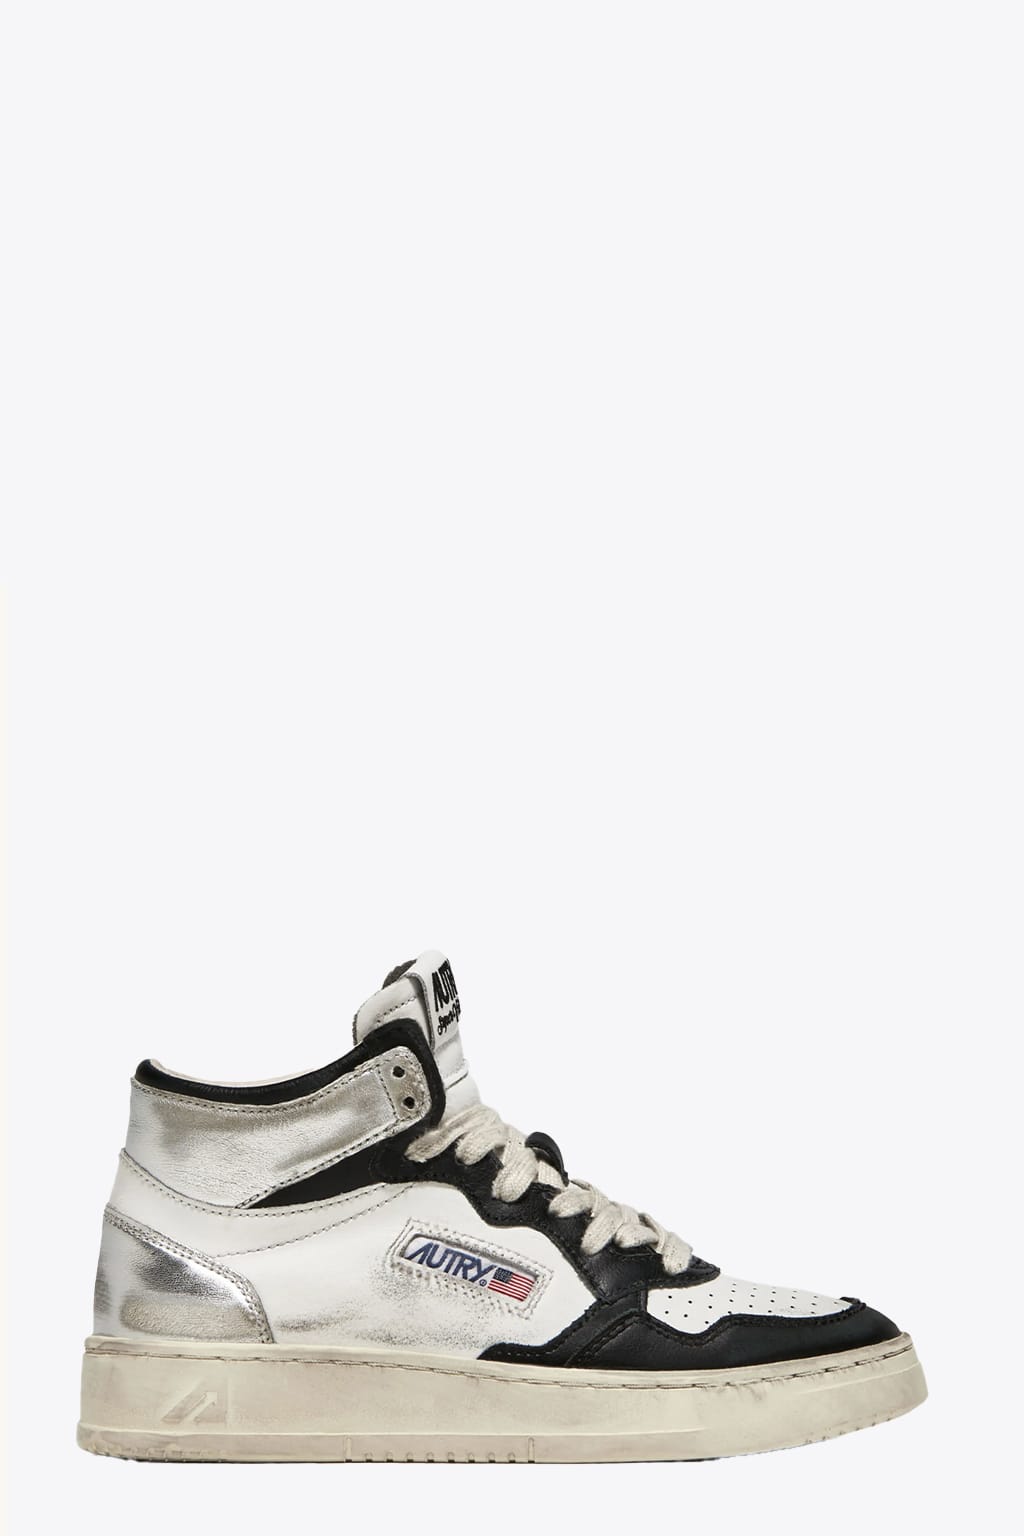 Autry Sup Vint Mid Wom Leat Wht/blk/sil White/silver/black distressed leather mid sneaker.